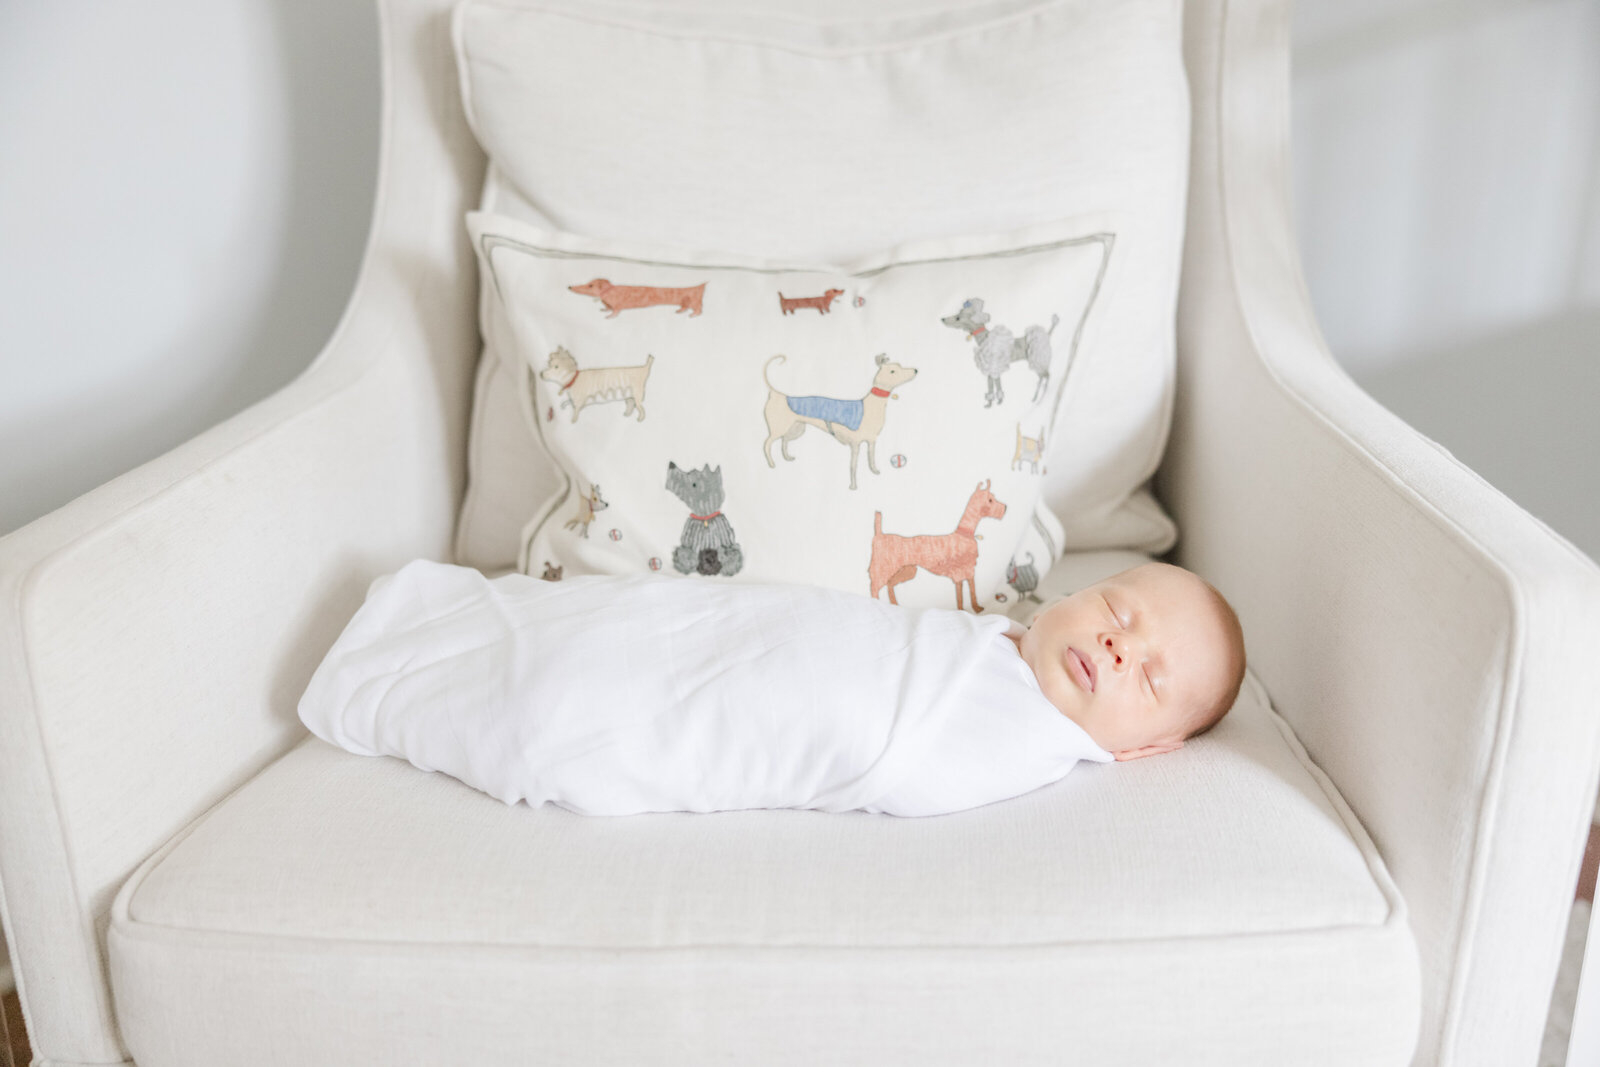 Newborn baby laying on a chair with a pillow patterned with dogs behind him.